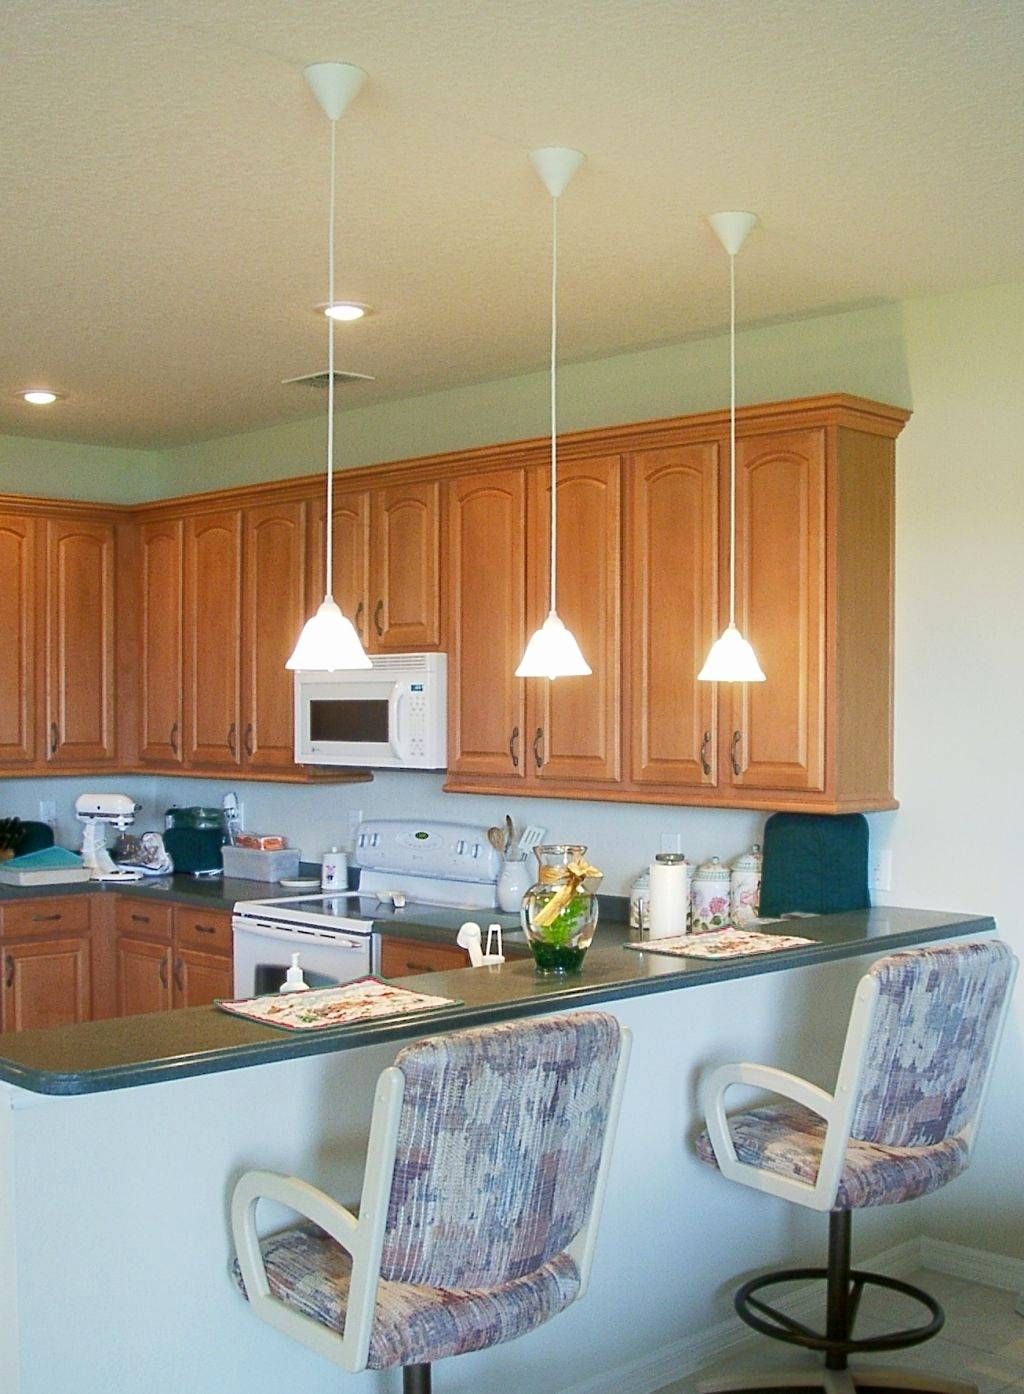 Pendant Lighting For Kitchen Island Fresh Low Hanging Mini Pendant Throughout Mini Pendant Lights Over Kitchen Island (View 6 of 15)